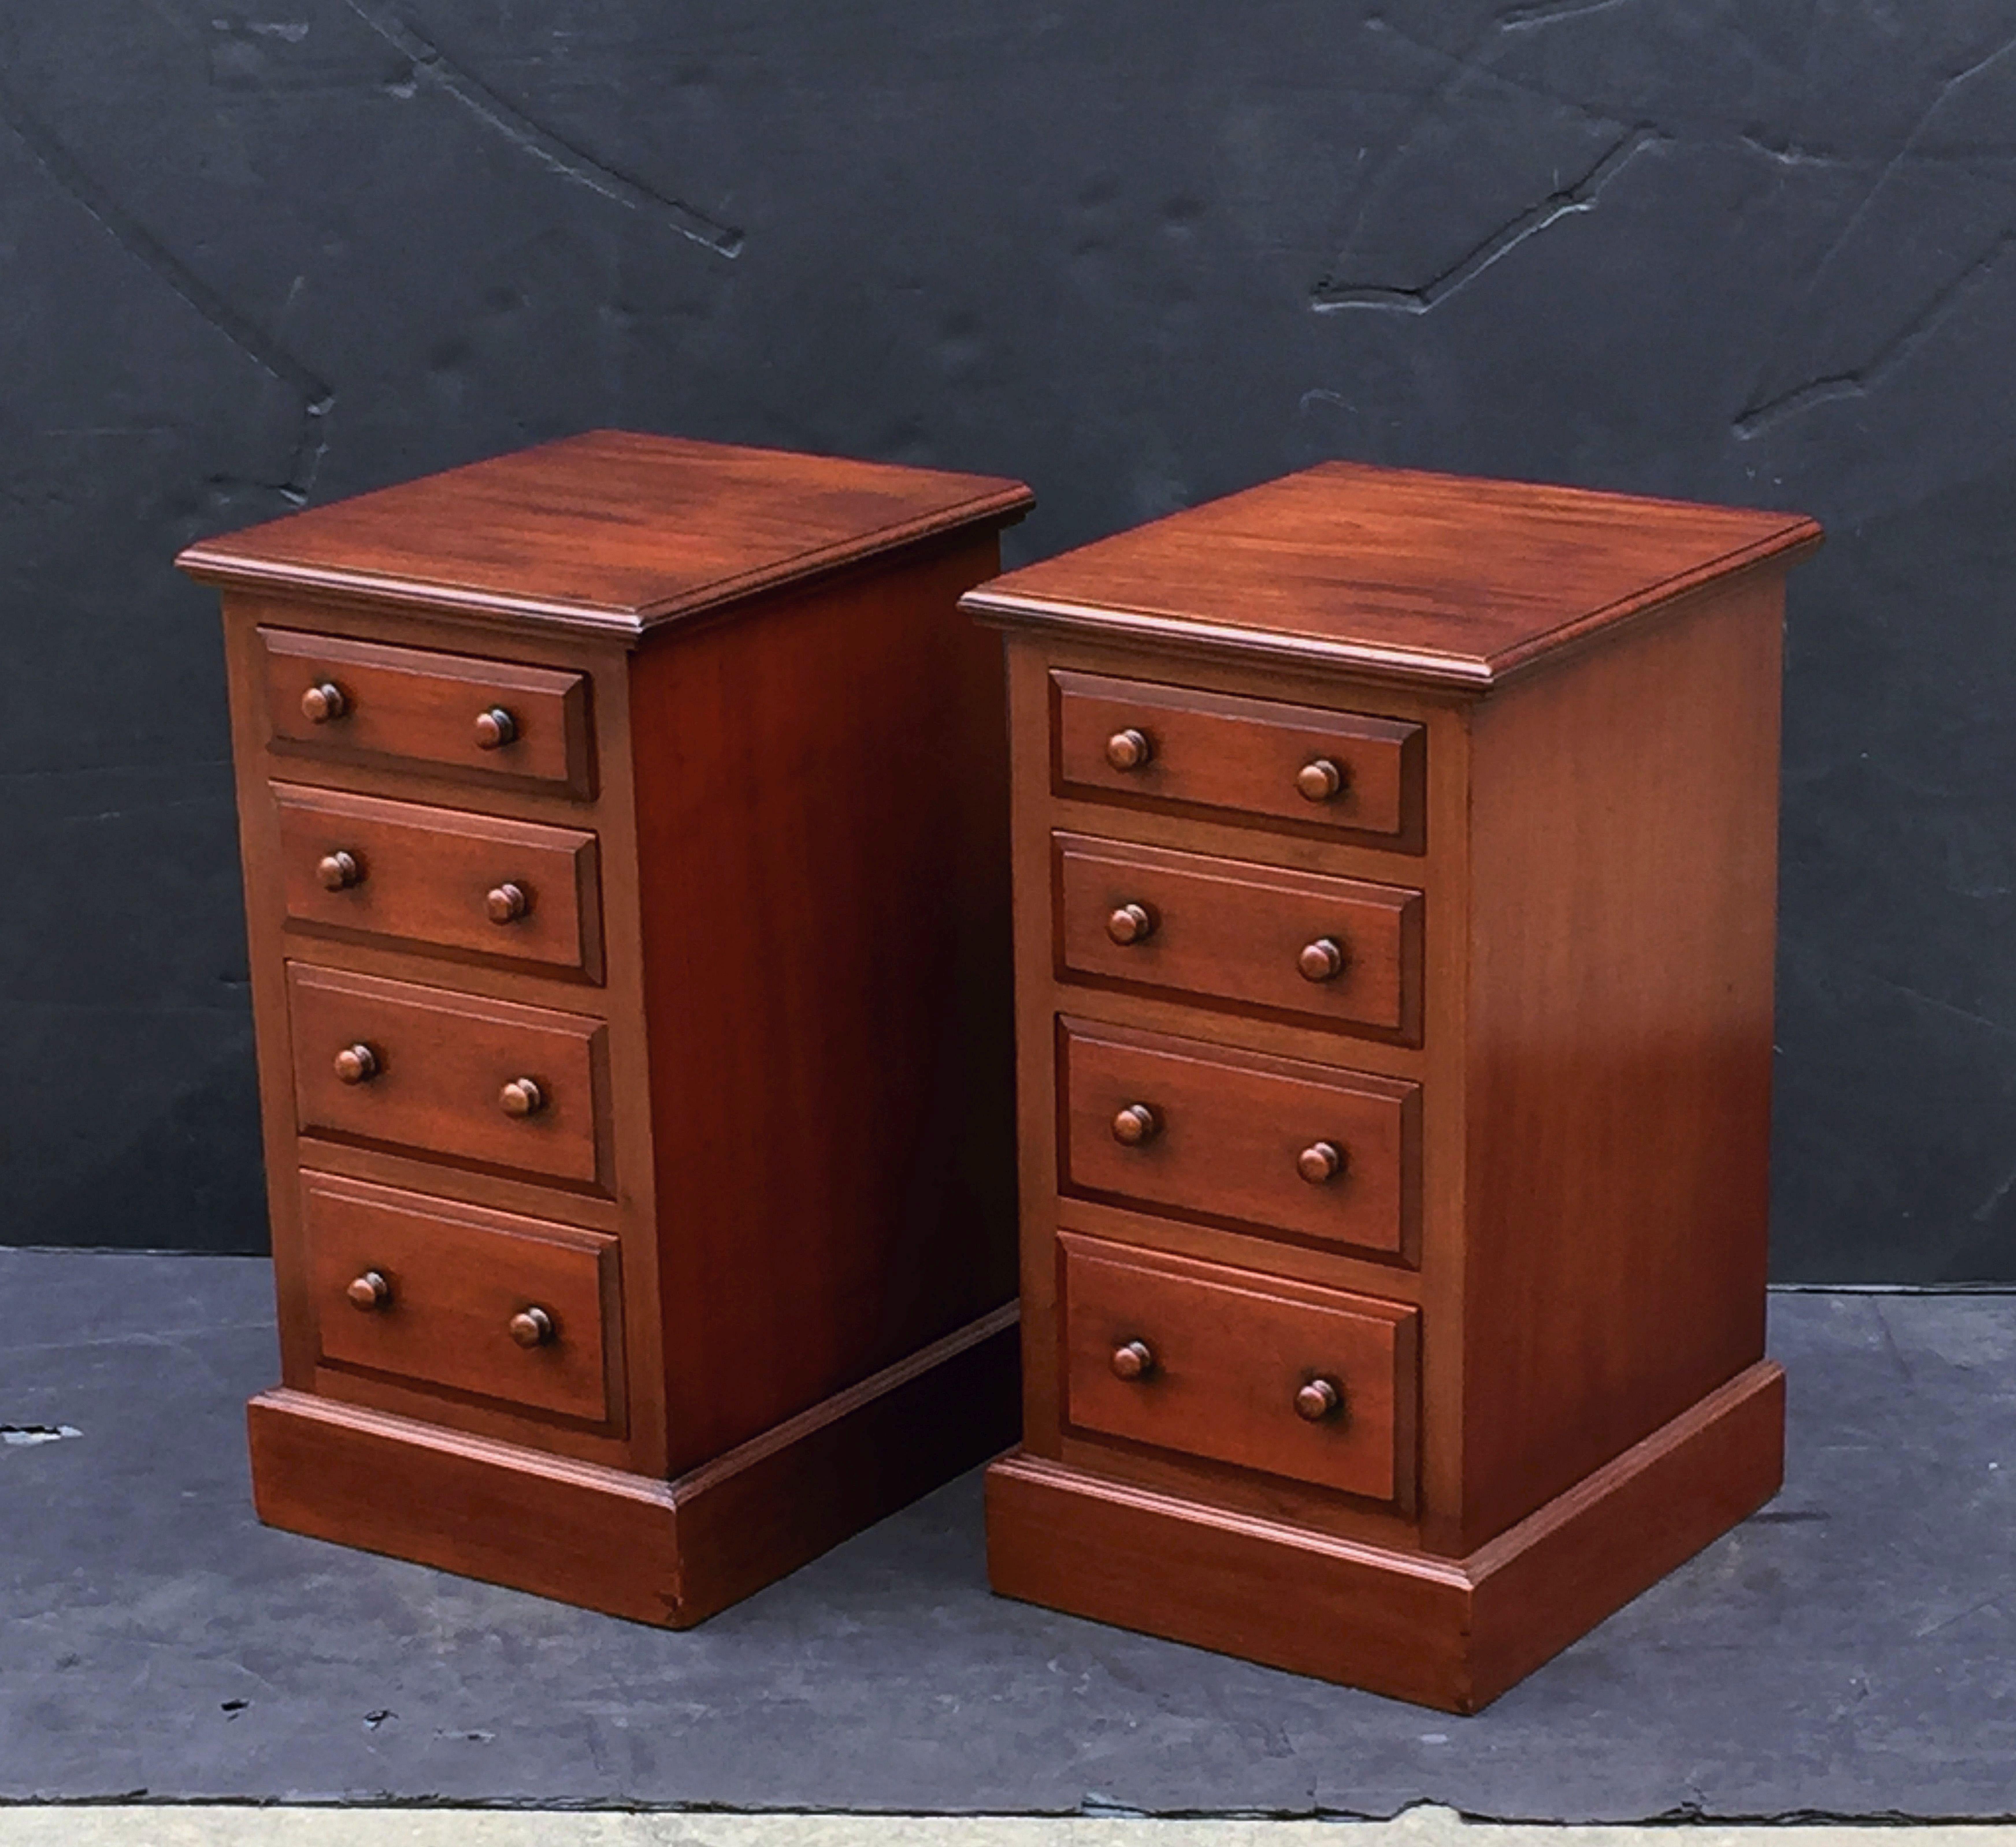 English Bedside Chests or Cabinet Nightstands of Mahogany - 'Priced as a Pair' 4